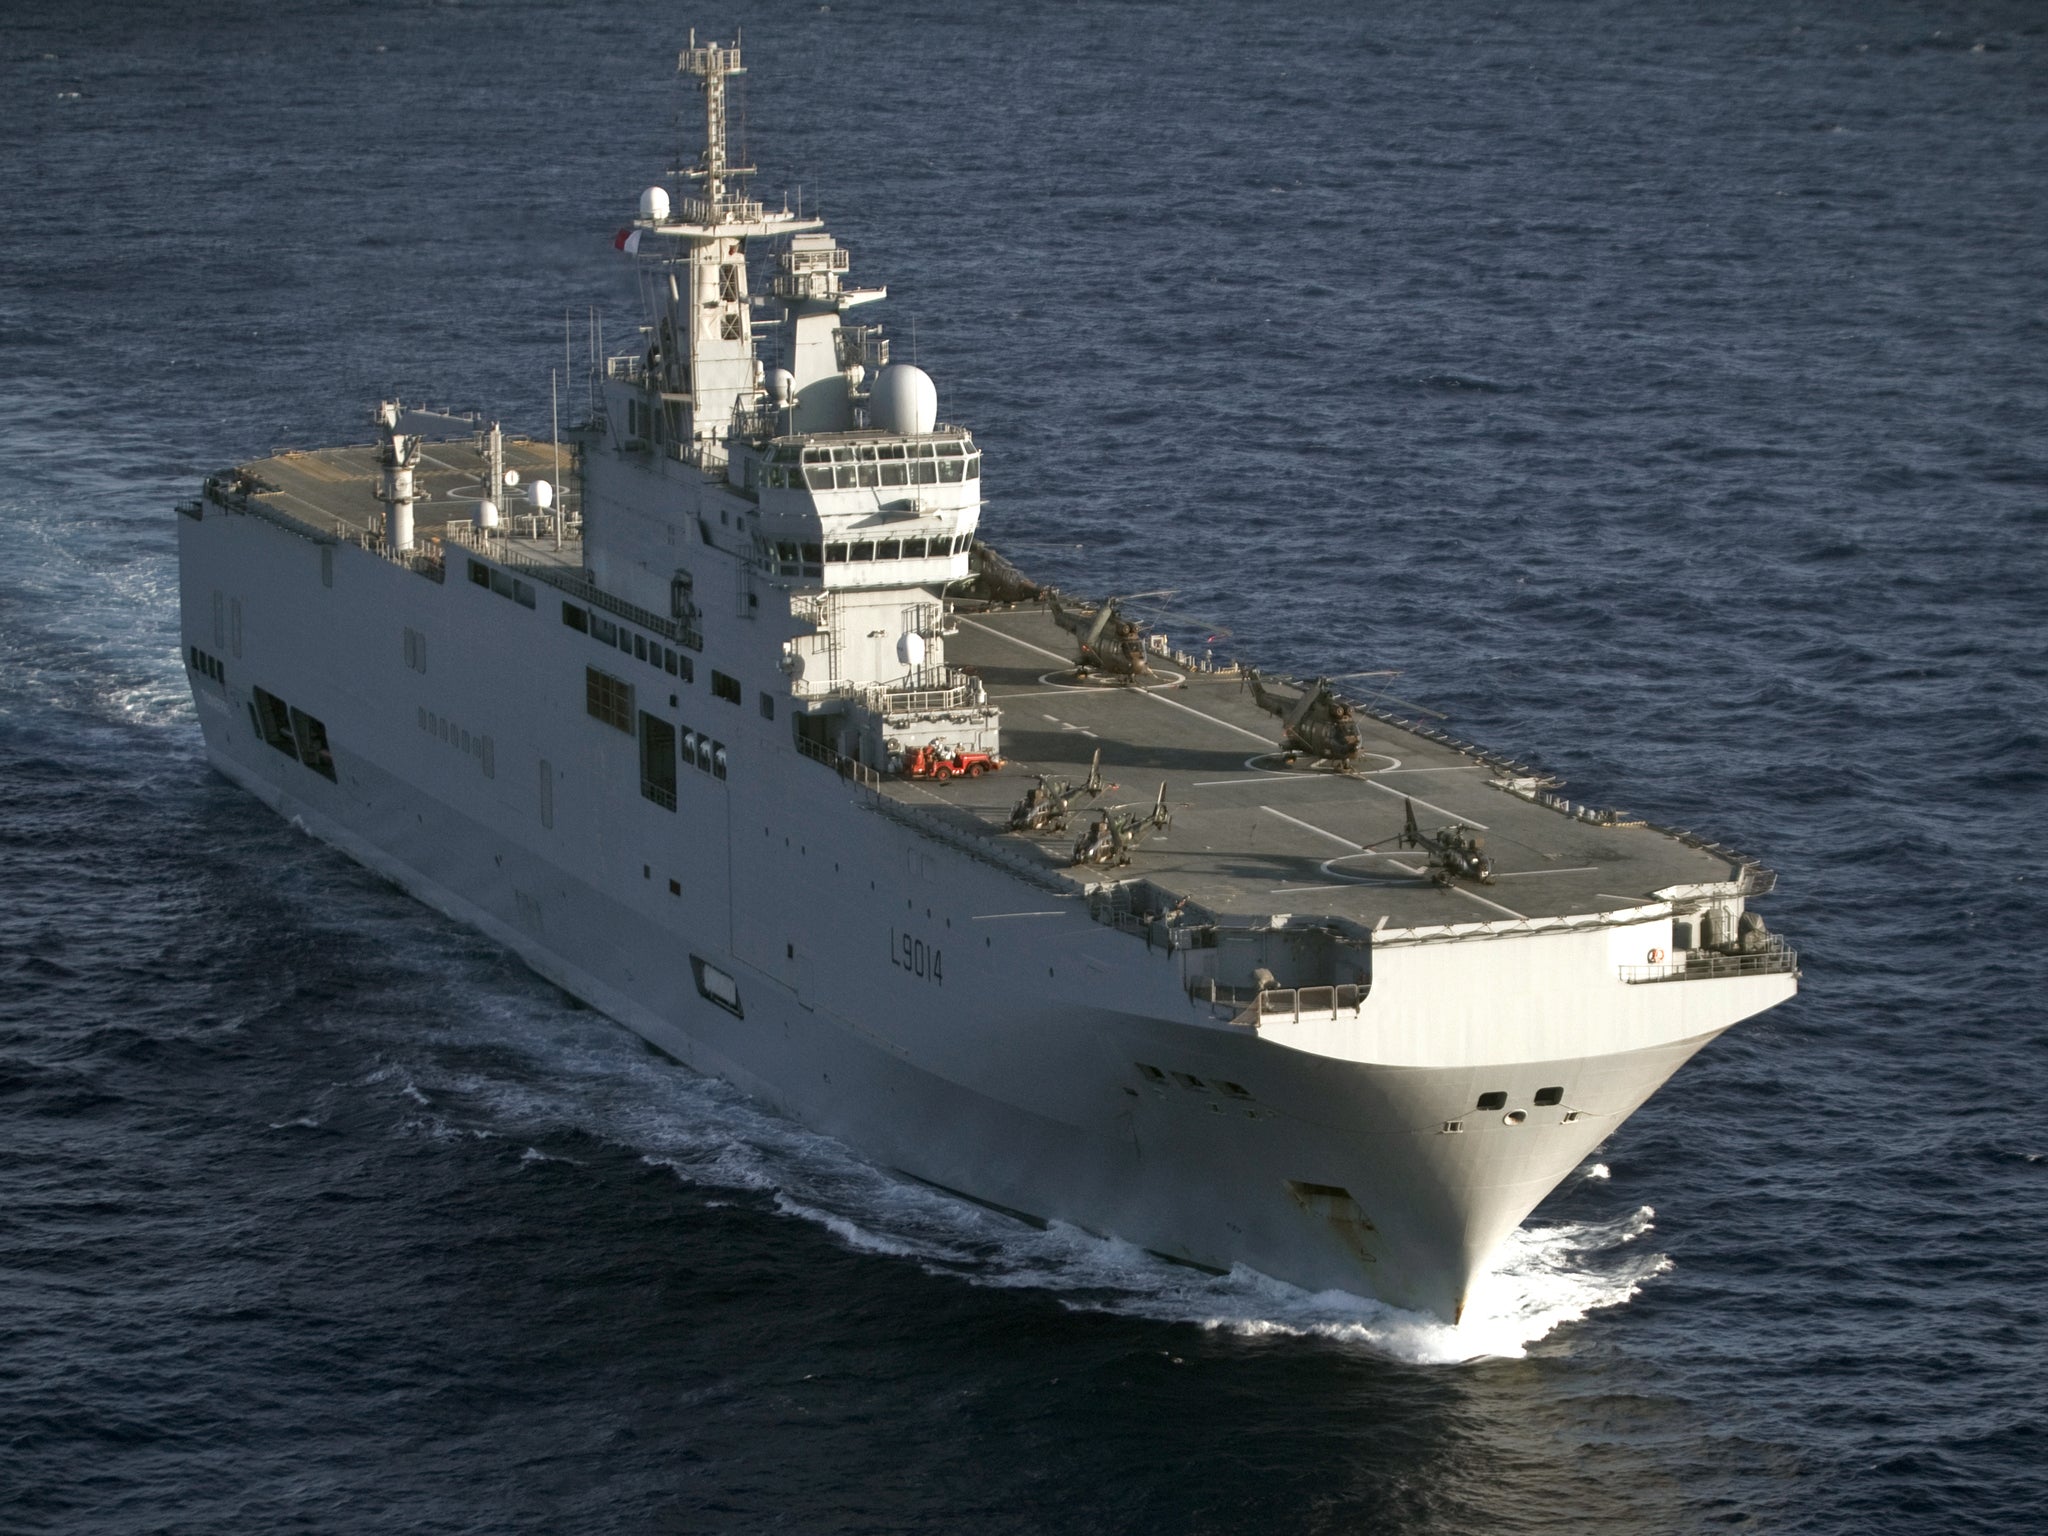 The French amphibious assault helicopter carrier 'Tonnerre' arrived in Portsmouth today